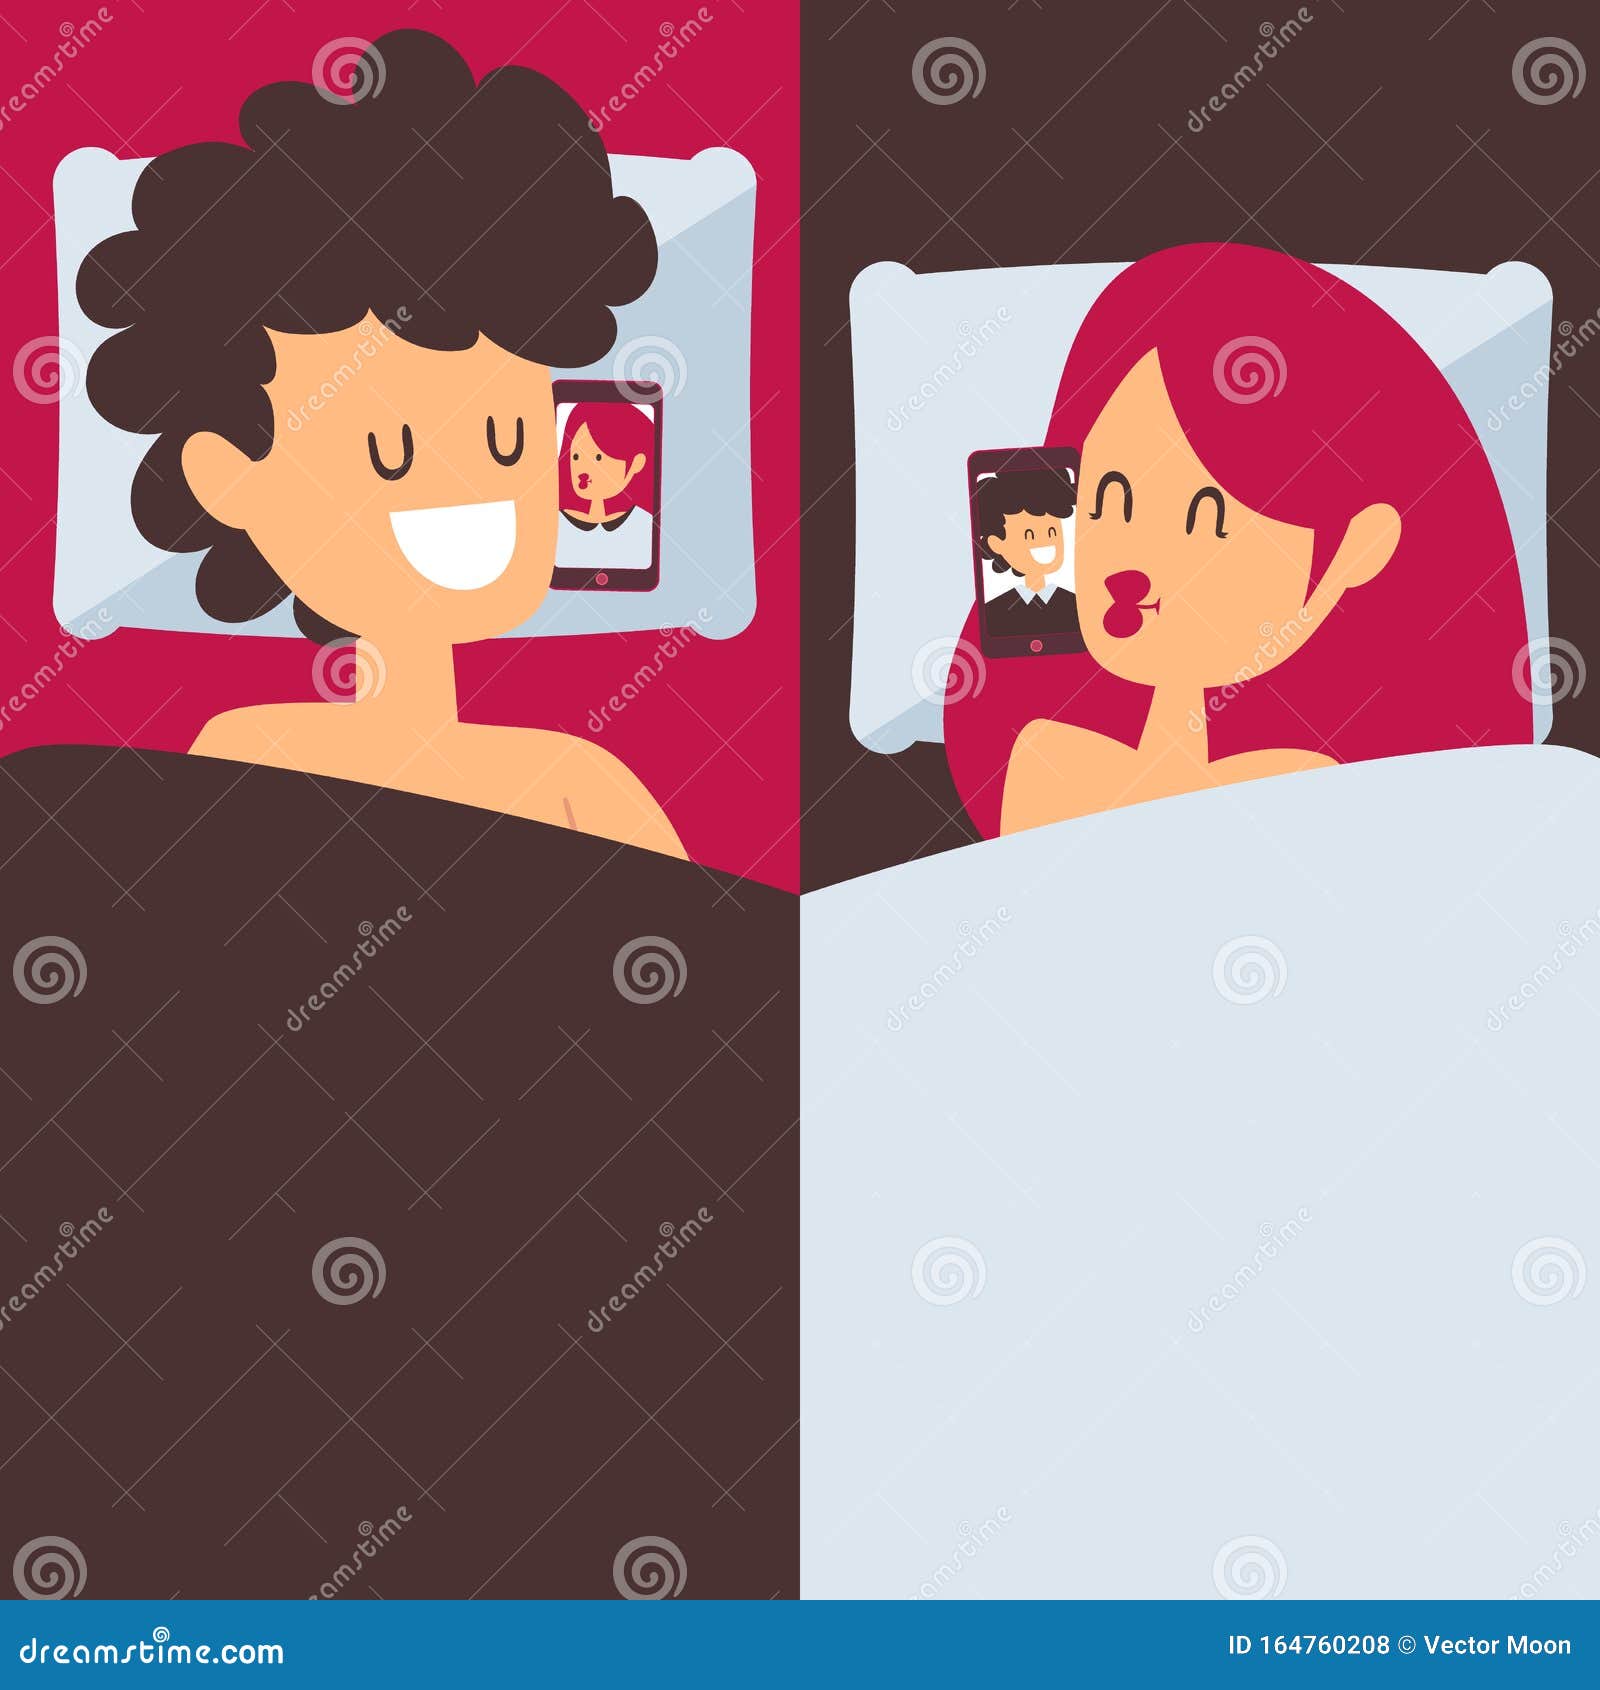 Online Dating Vector Illustration. Man and Woman Cartoon Characters in Bed  with Smartphones Stock Vector - Illustration of people, female: 164760208